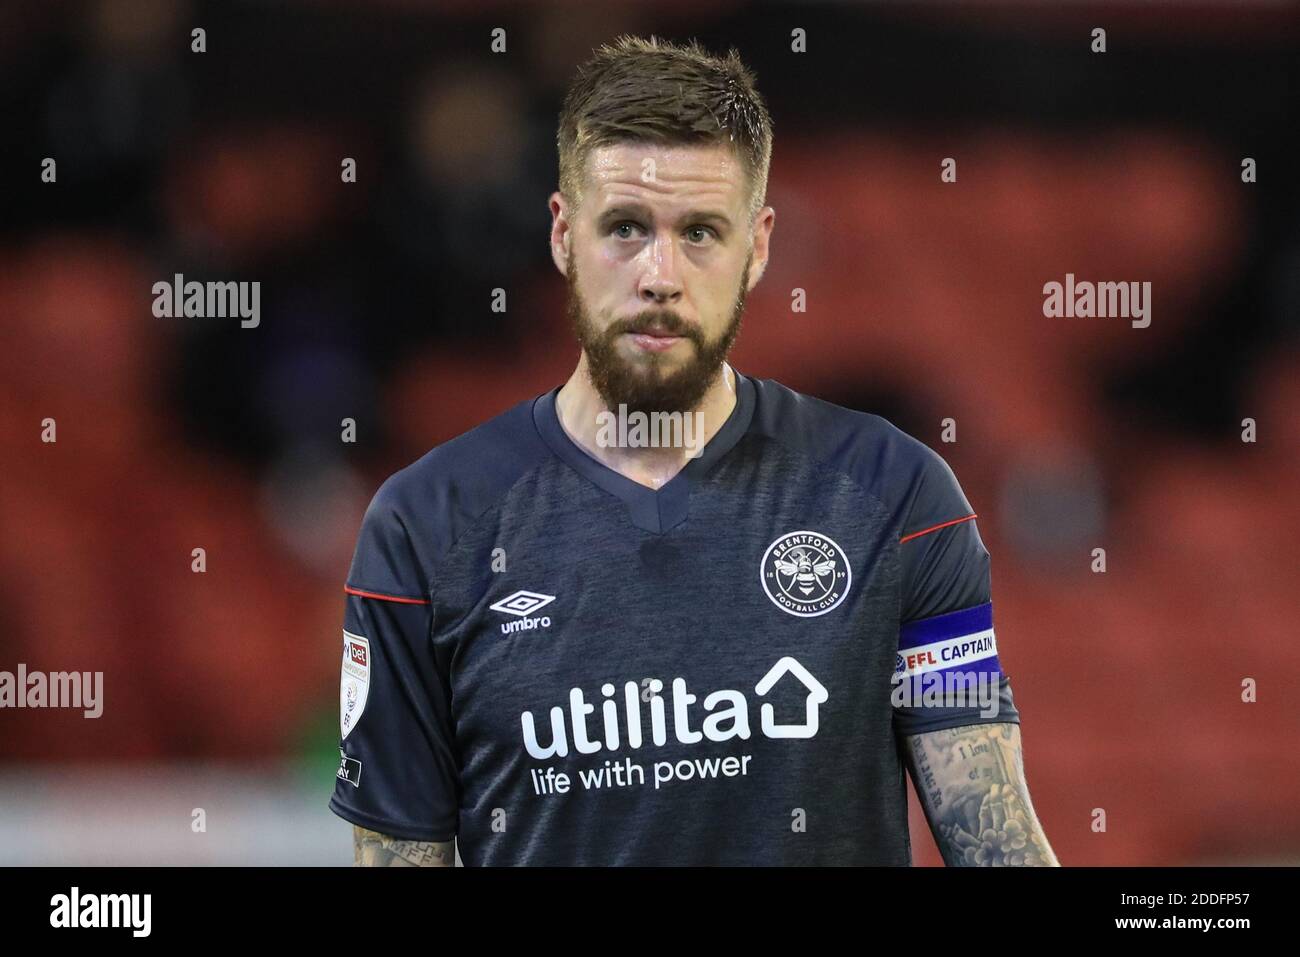 Pontus Jansson #18 of Brentford during the game Stock Photo